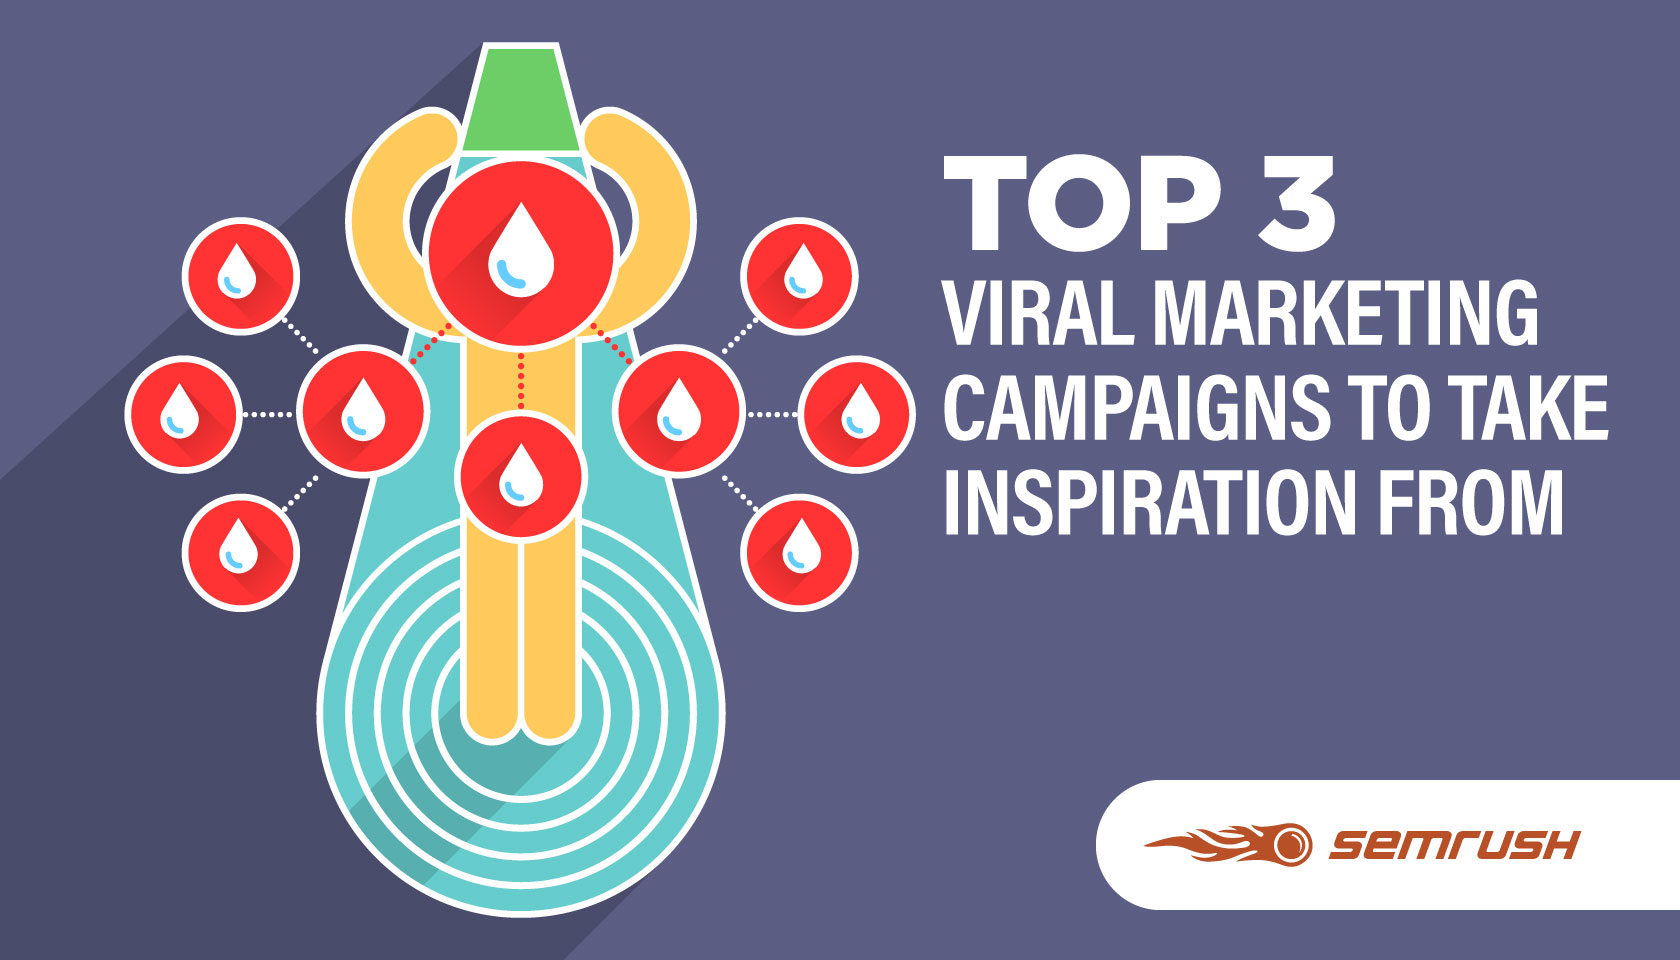 Top 3 Viral Marketing Campaigns To Take Inspiration From